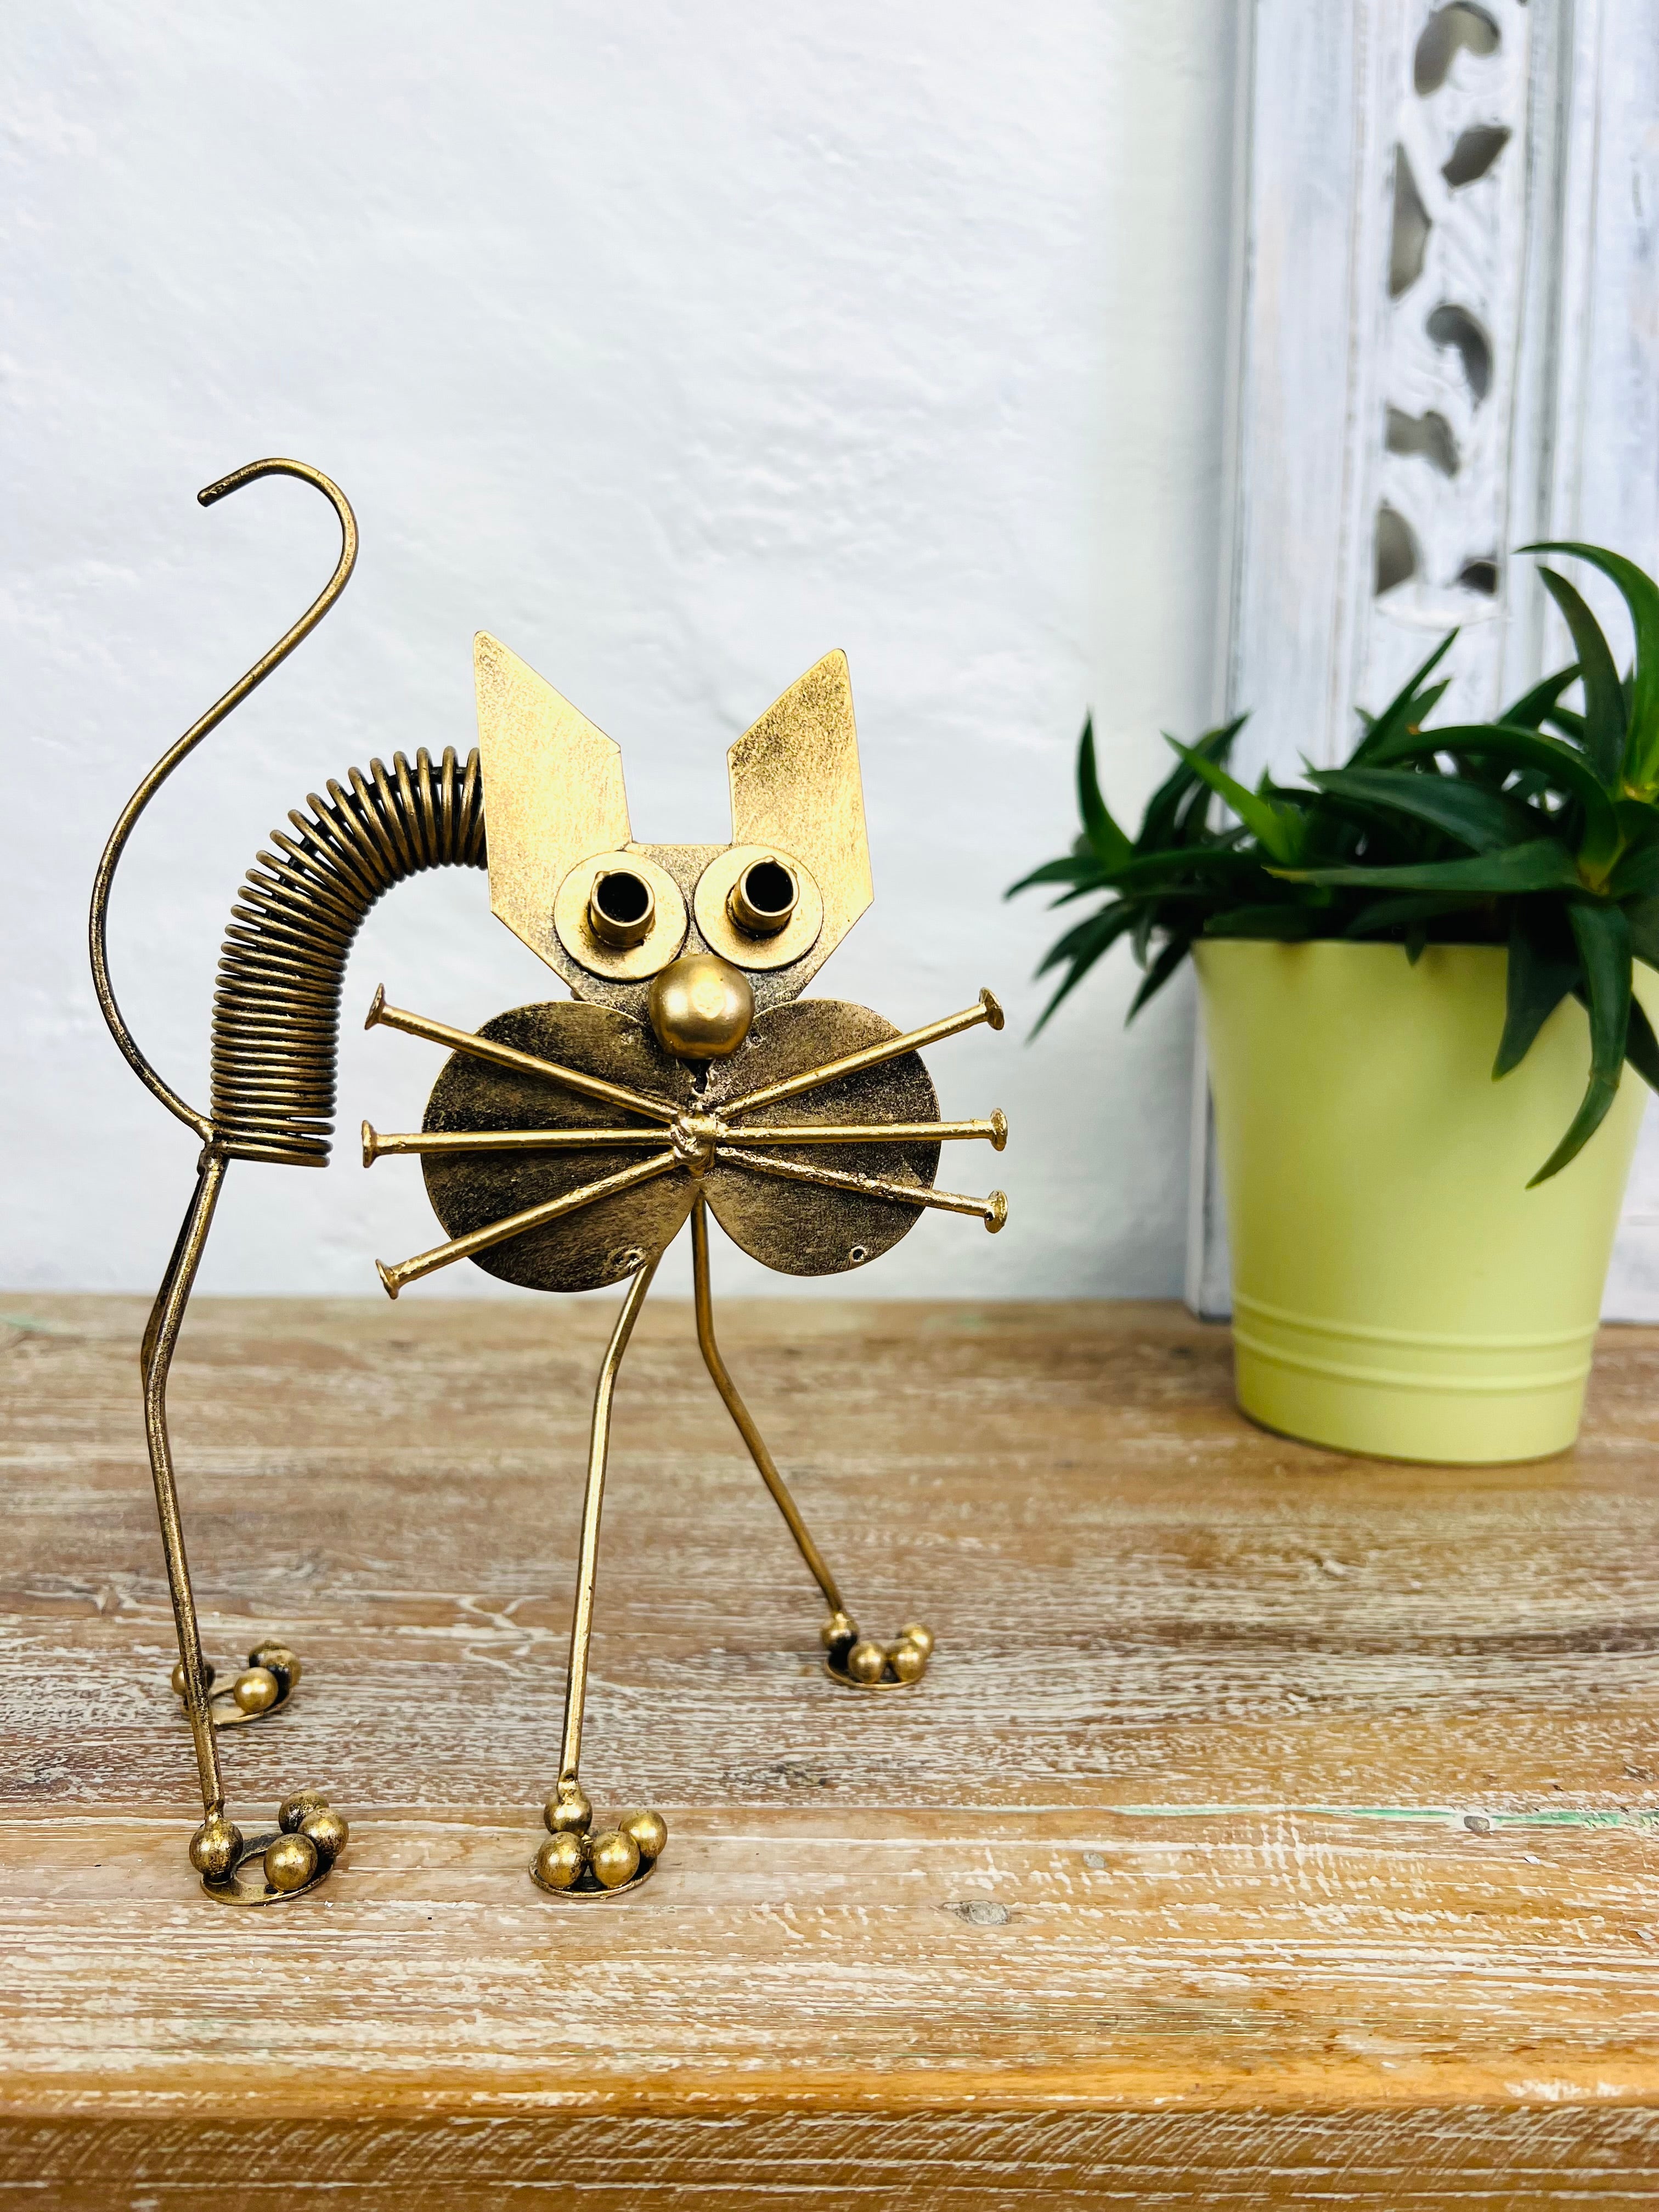 front view of metal scaredy cat on wooden surface